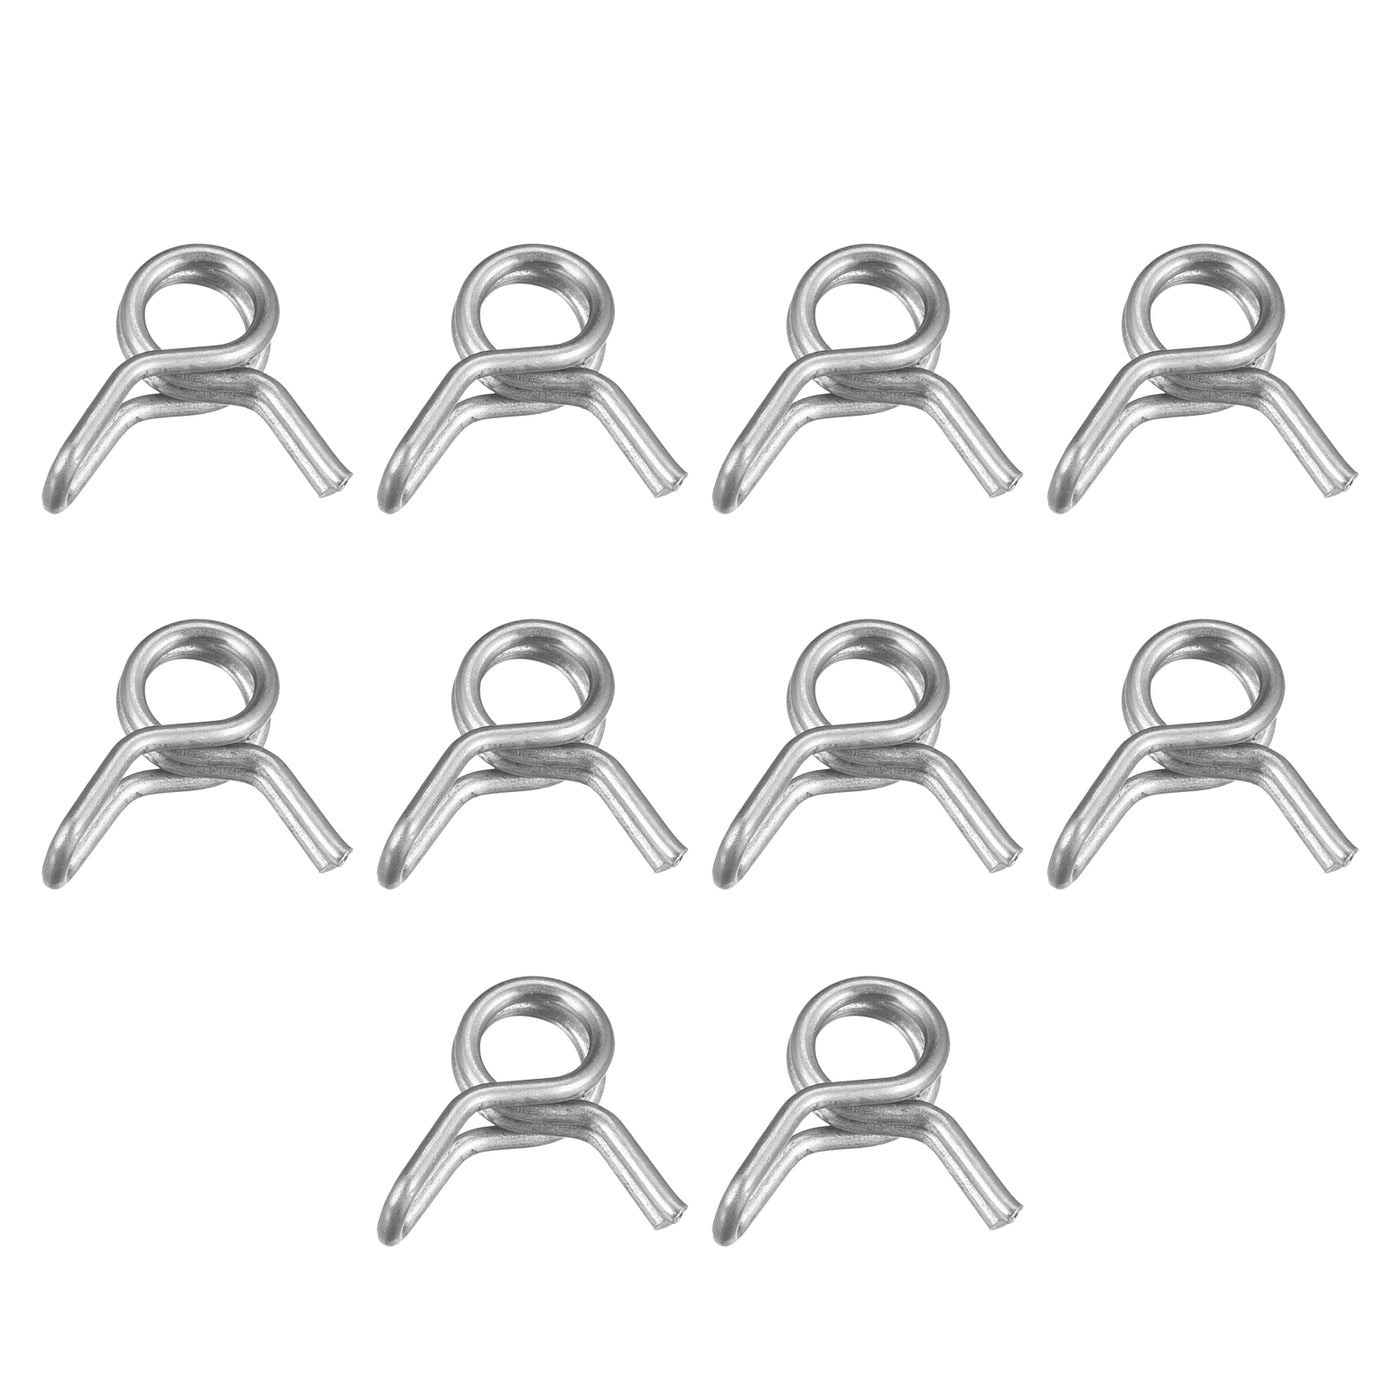 Uxcell Uxcell Double Wire Spring Hose Clamp, 10pcs 304 Stainless Steel 13mm Spring Clips